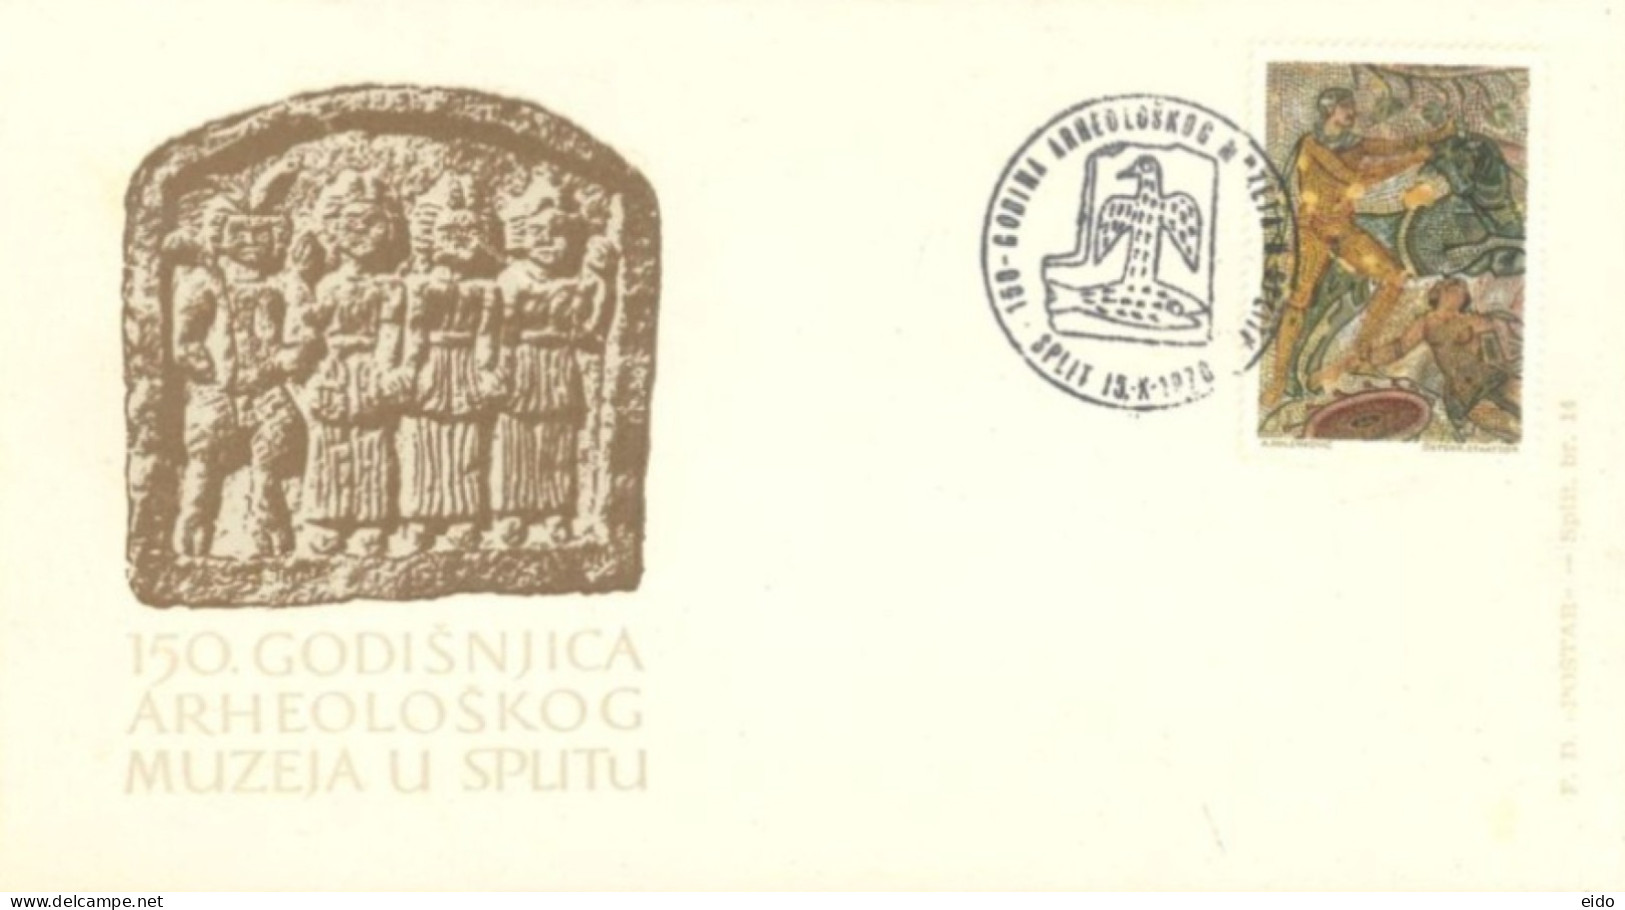 YUGOSLAVIA  - 1970, FDC STAMP OF150 GODINKA  ARCHAEOLOGICAL MUSEUM OF SPLIT WITH DESCRIPTION LEAFLET. - Lettres & Documents